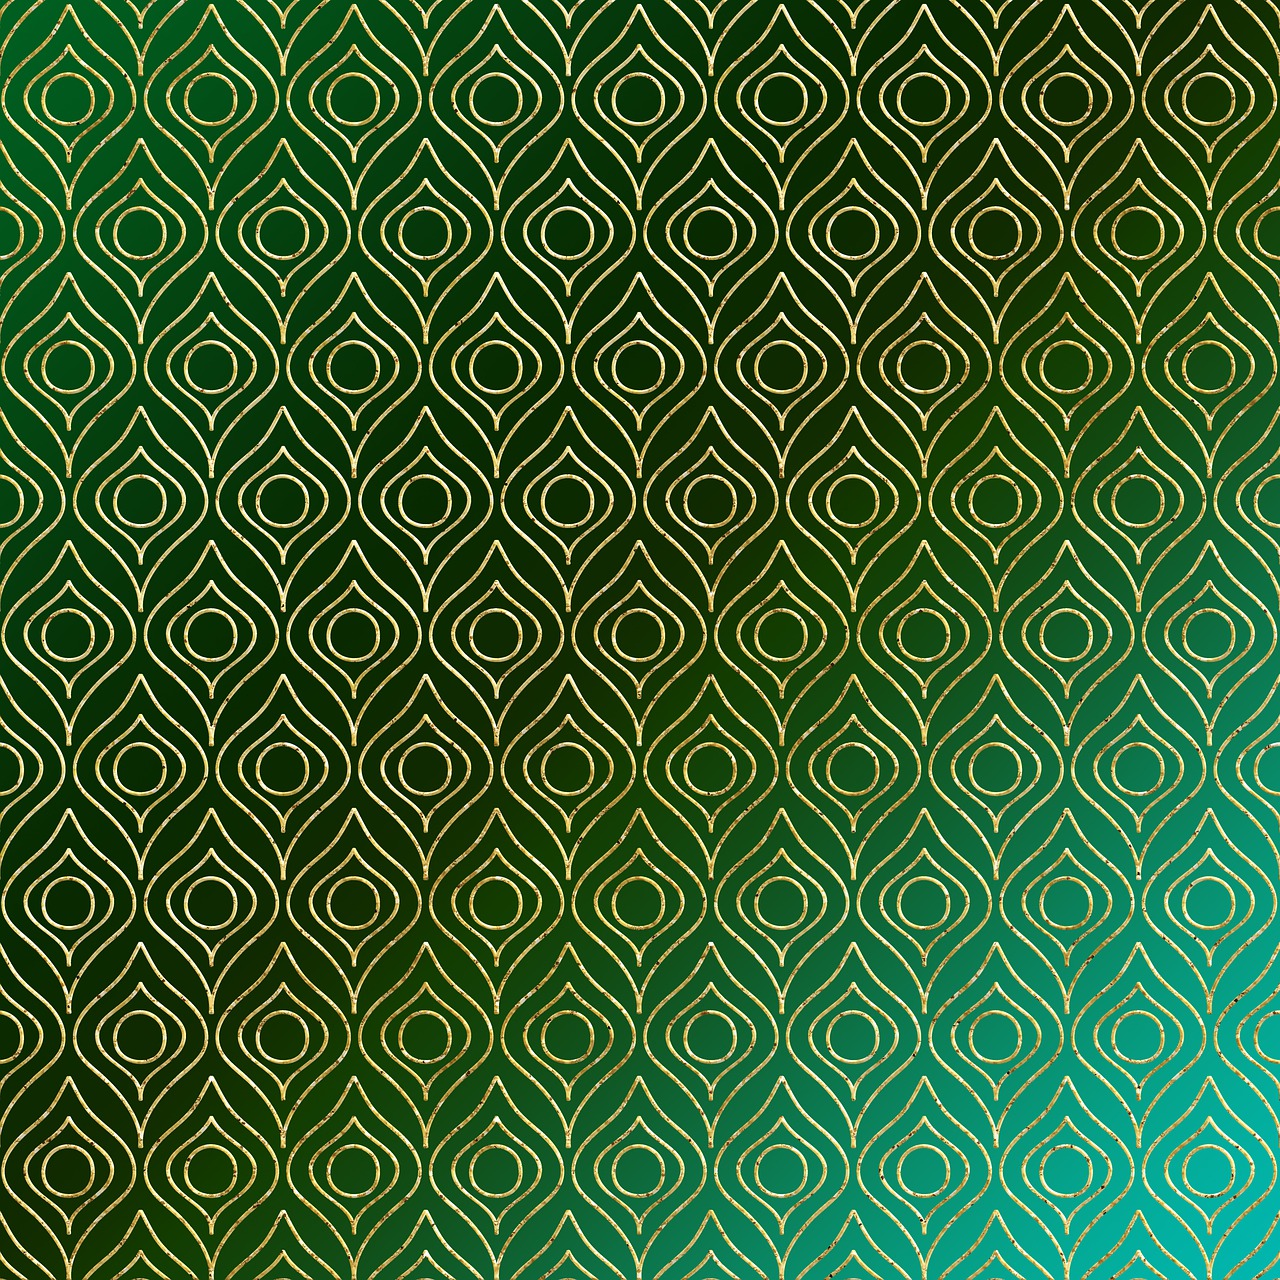 a close up of a green and white wallpaper, shutterstock, art deco, ornate golden background, line vector art, peacock feathers, gradient darker to bottom